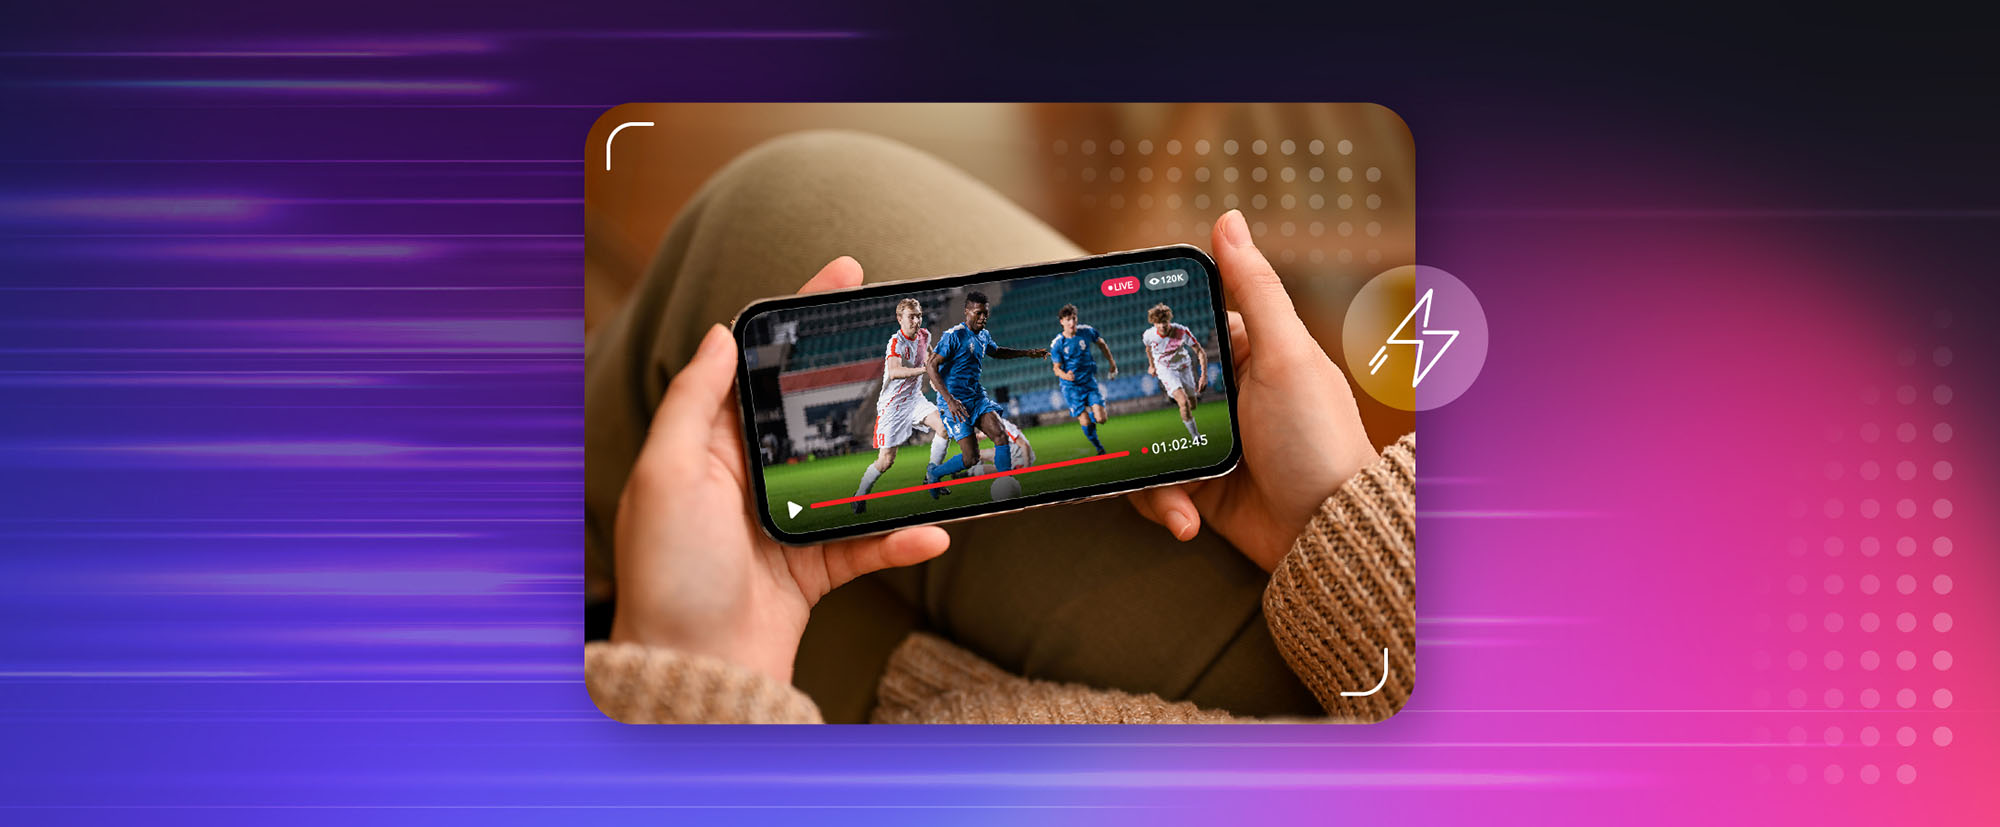  image of woman holding phone of a live sports broadcast of a soccer game streaming live